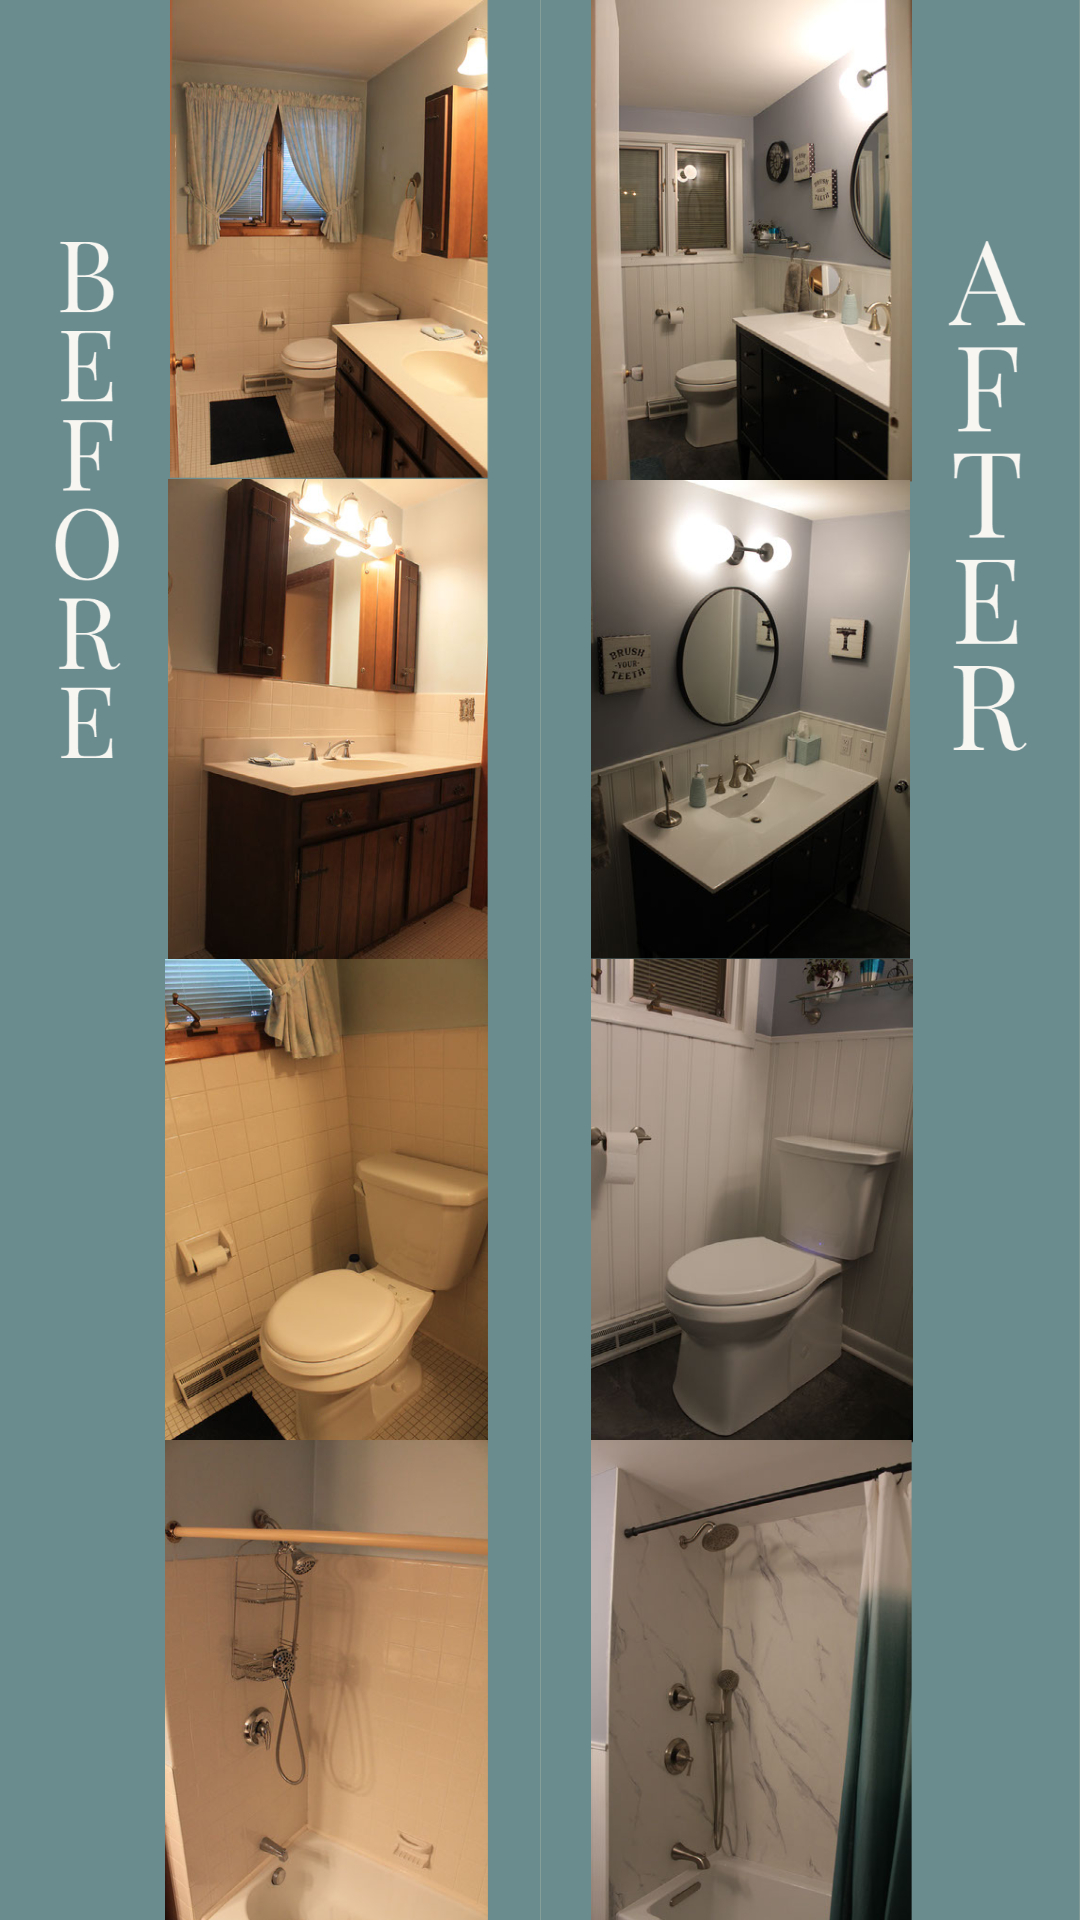 My renovation experience image banner 8